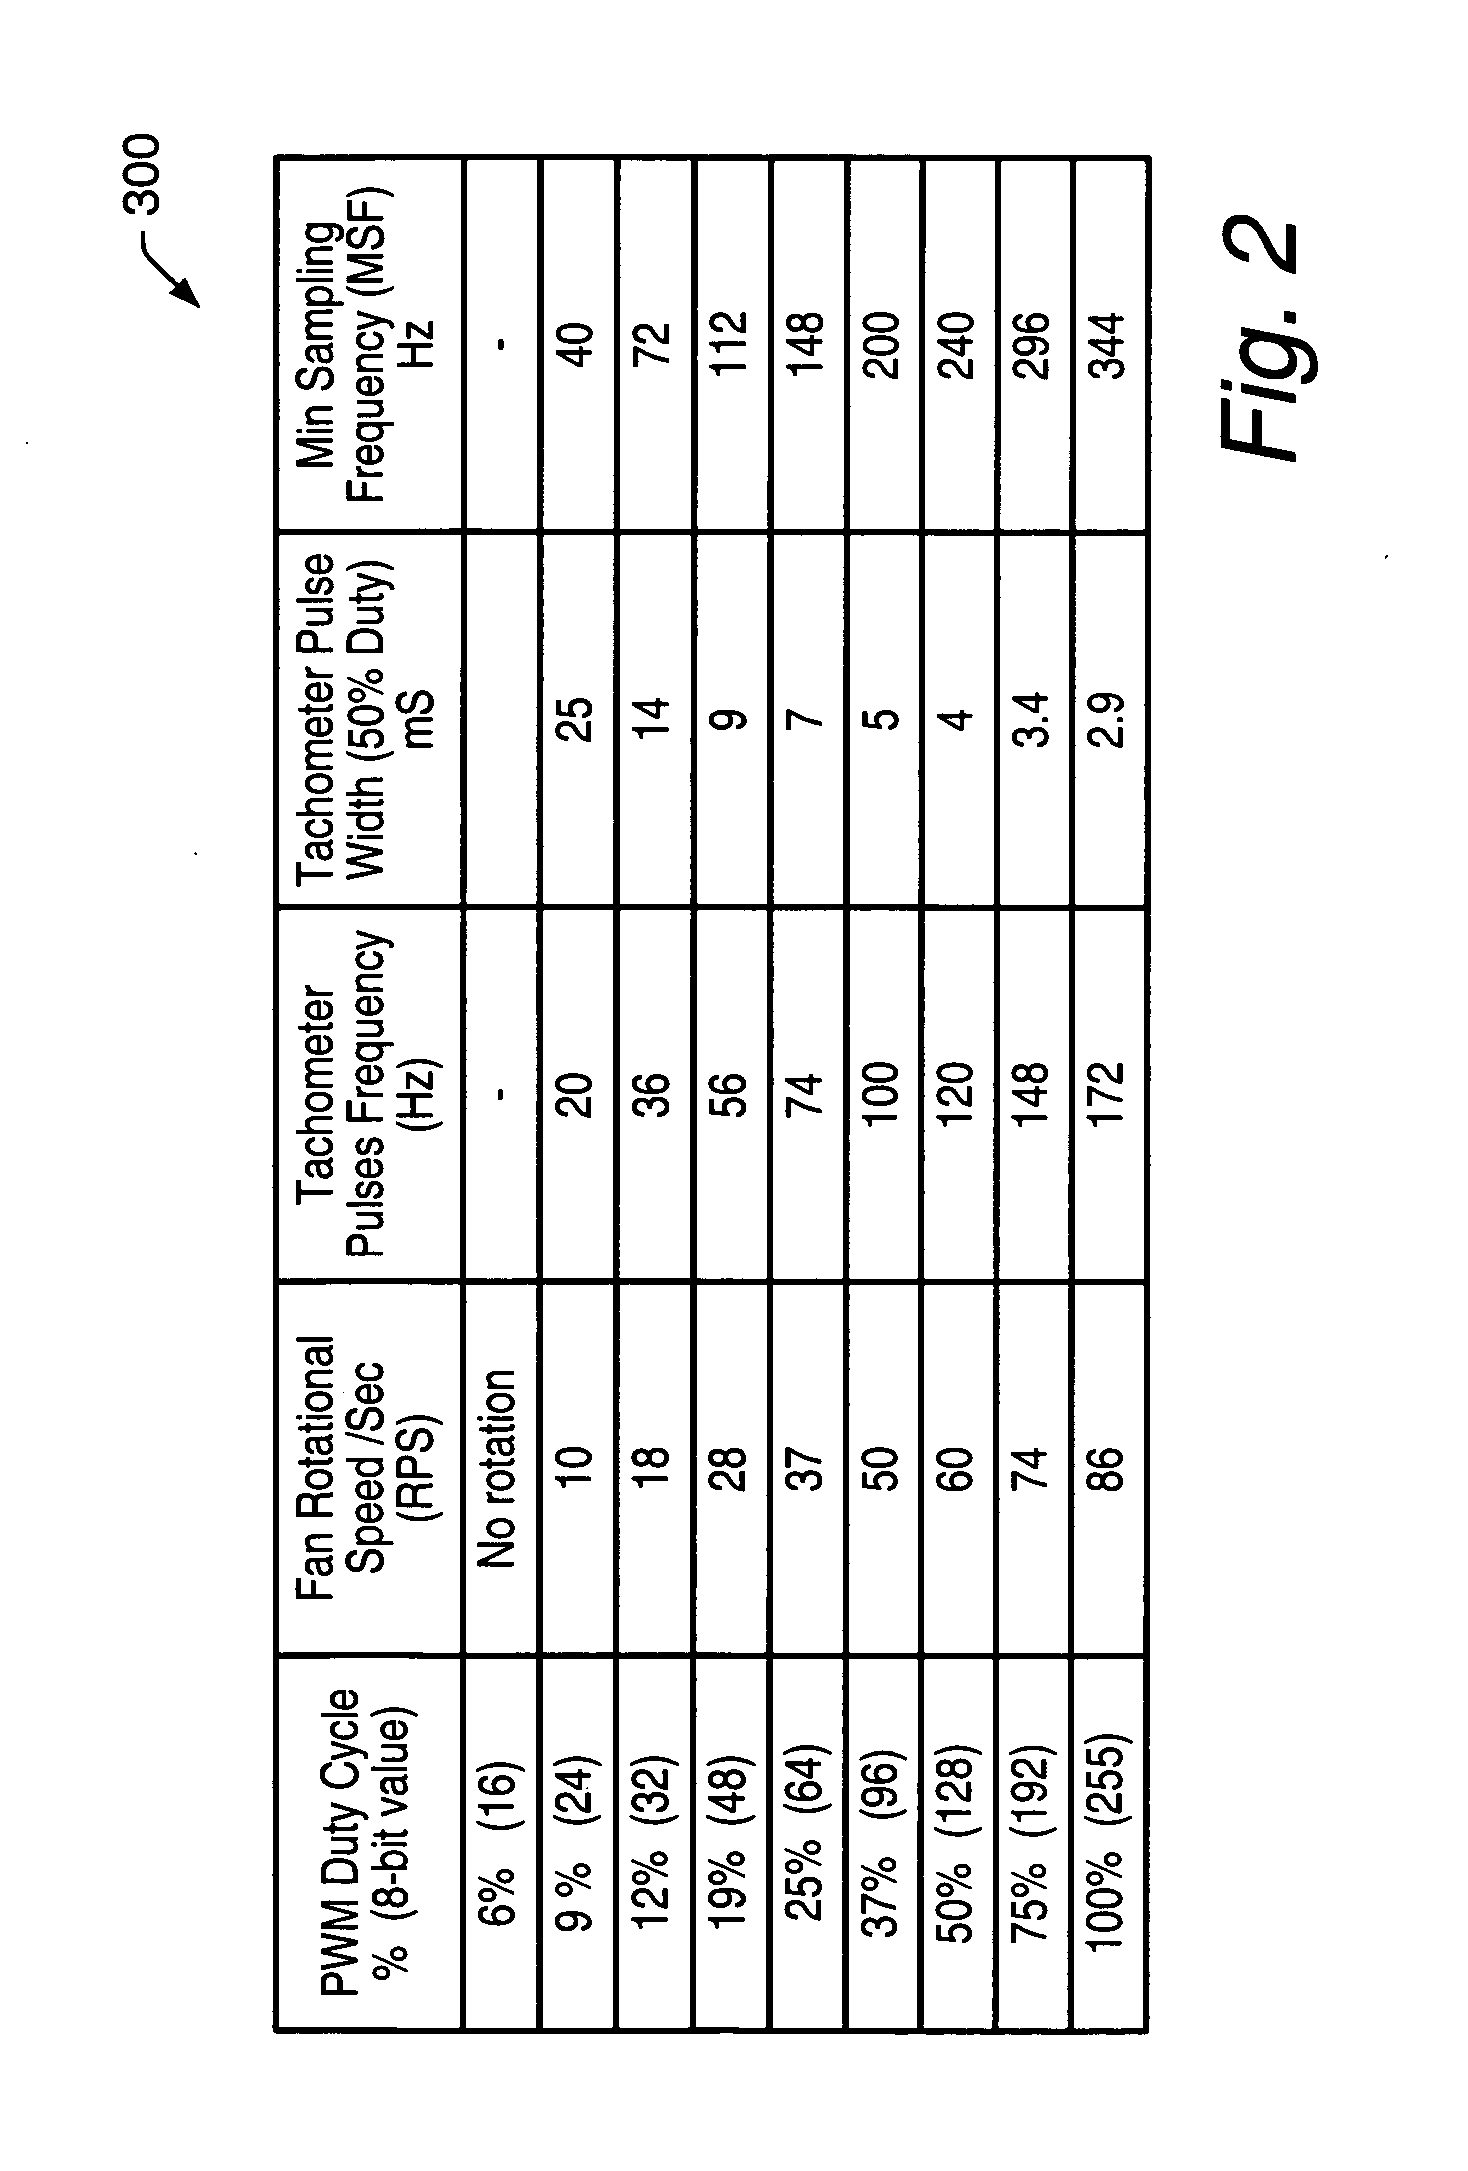 Method and apparatus to achieve accurate fan tachometer readings for fans with different speeds